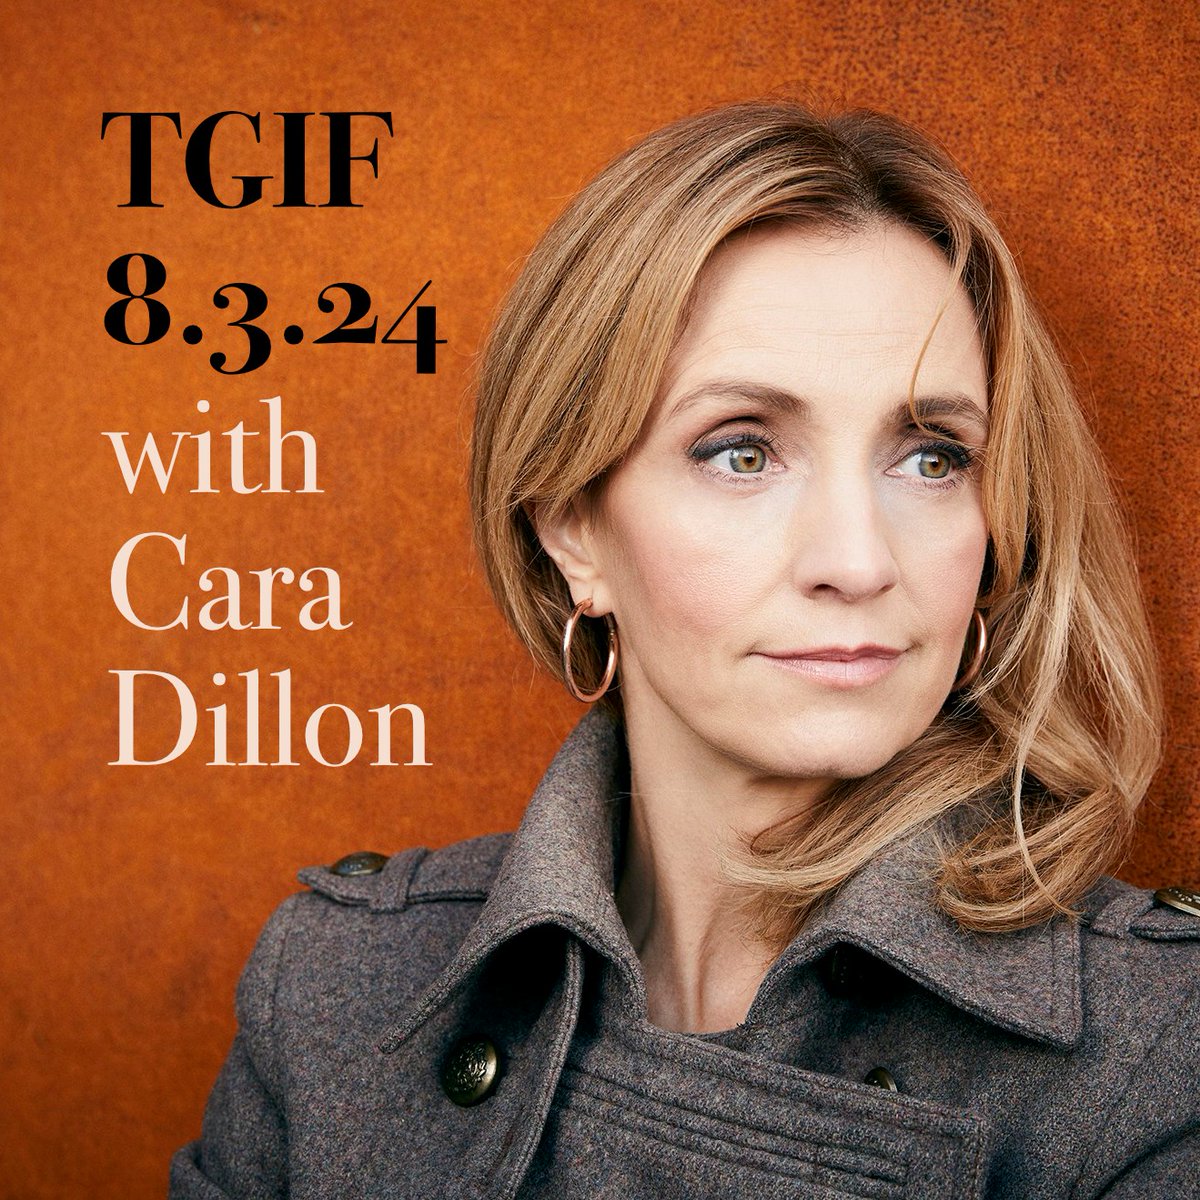 Happy International Women's Day! our special guest at 10am today is @CaraDillonSings - she talks about her beautiful new album, and her piece 'White Sheets' is very apt for today. Listen here: sheffieldlive.org/player